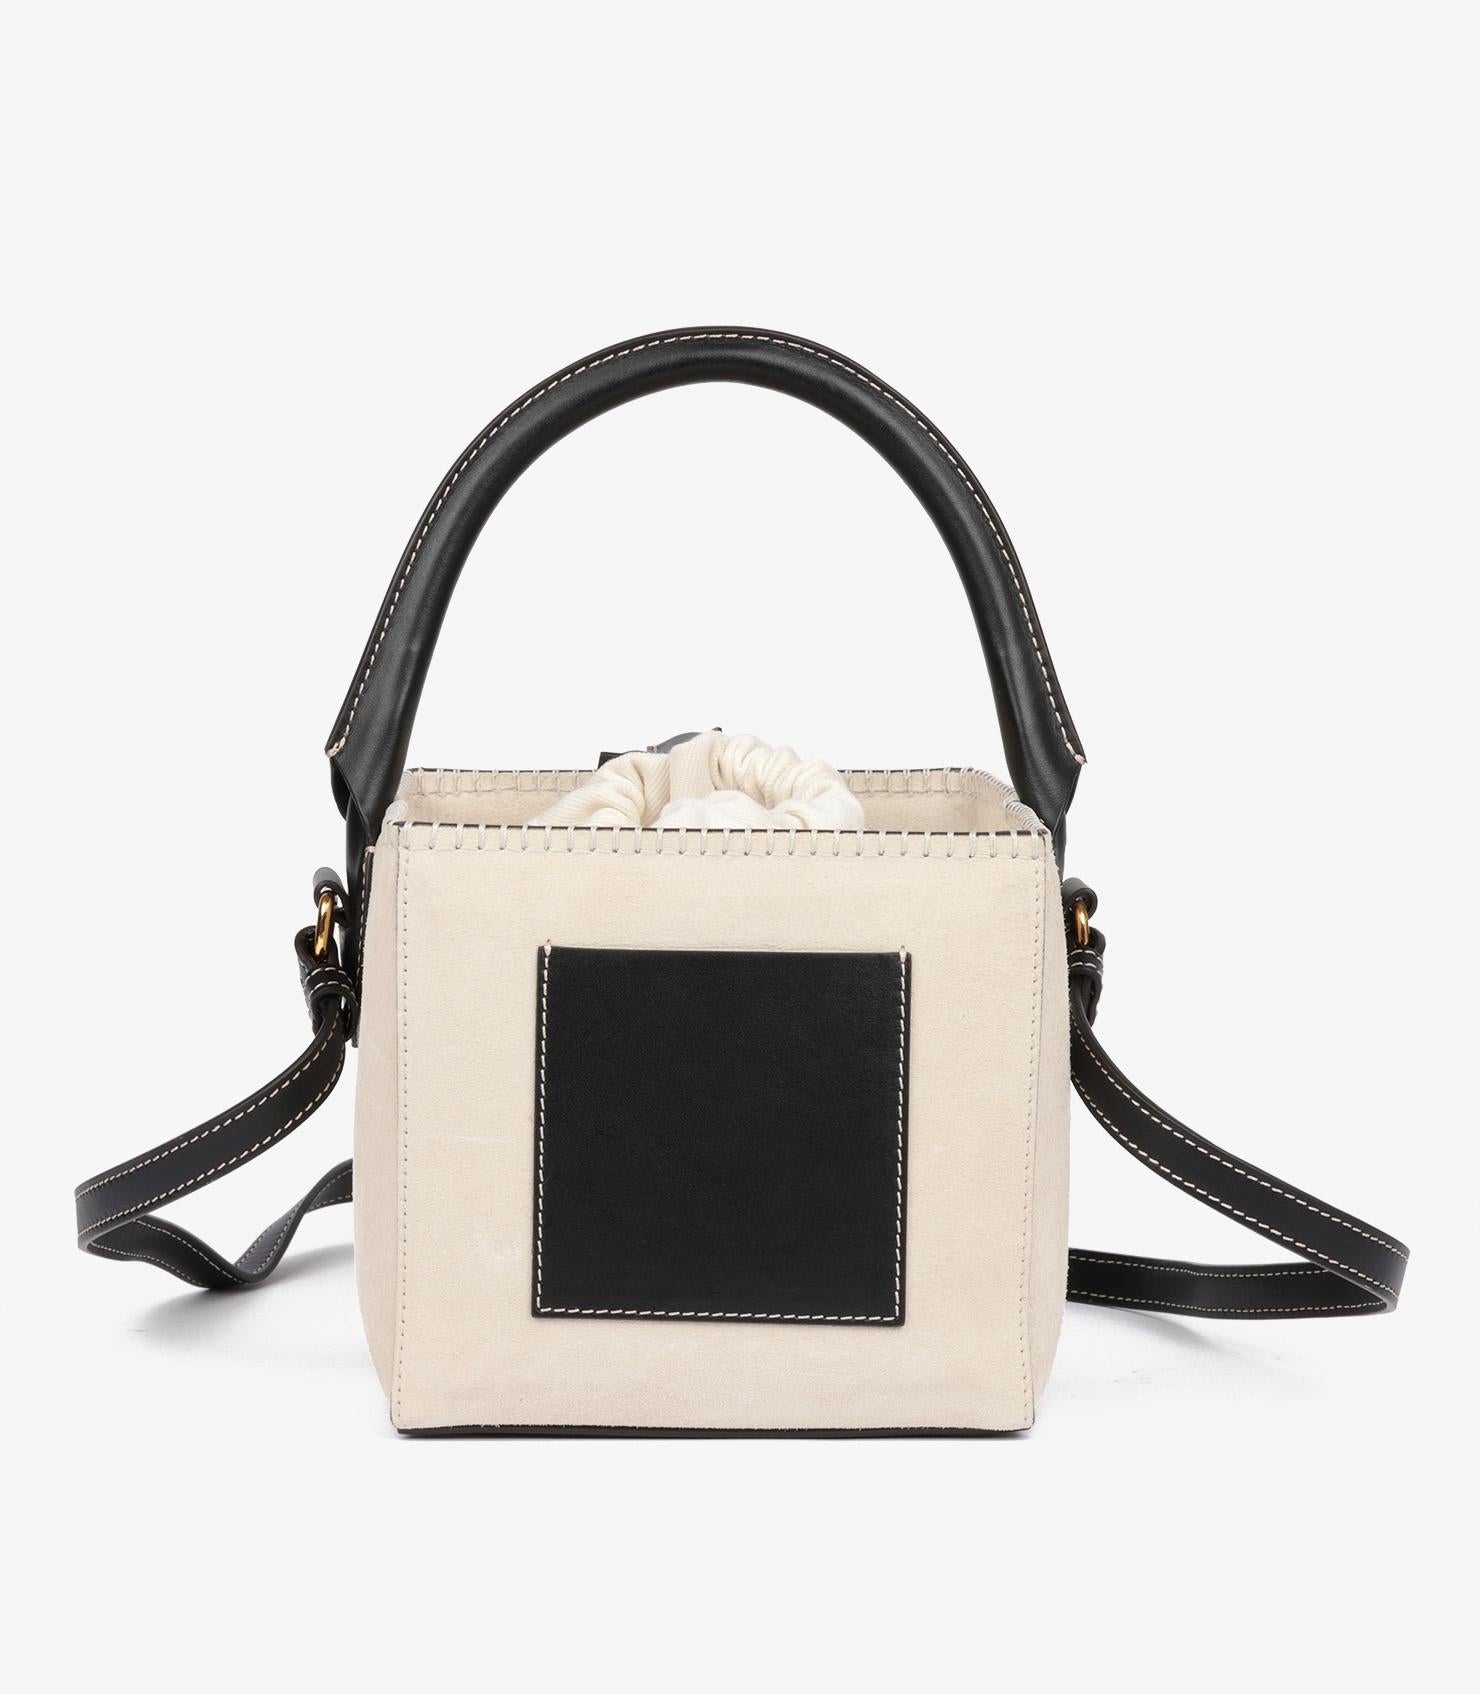 Jacquemus Off White Suede & Black Calfskin Leather Le Seau Carré Bucket Bag In Excellent Condition For Sale In Bishop's Stortford, Hertfordshire